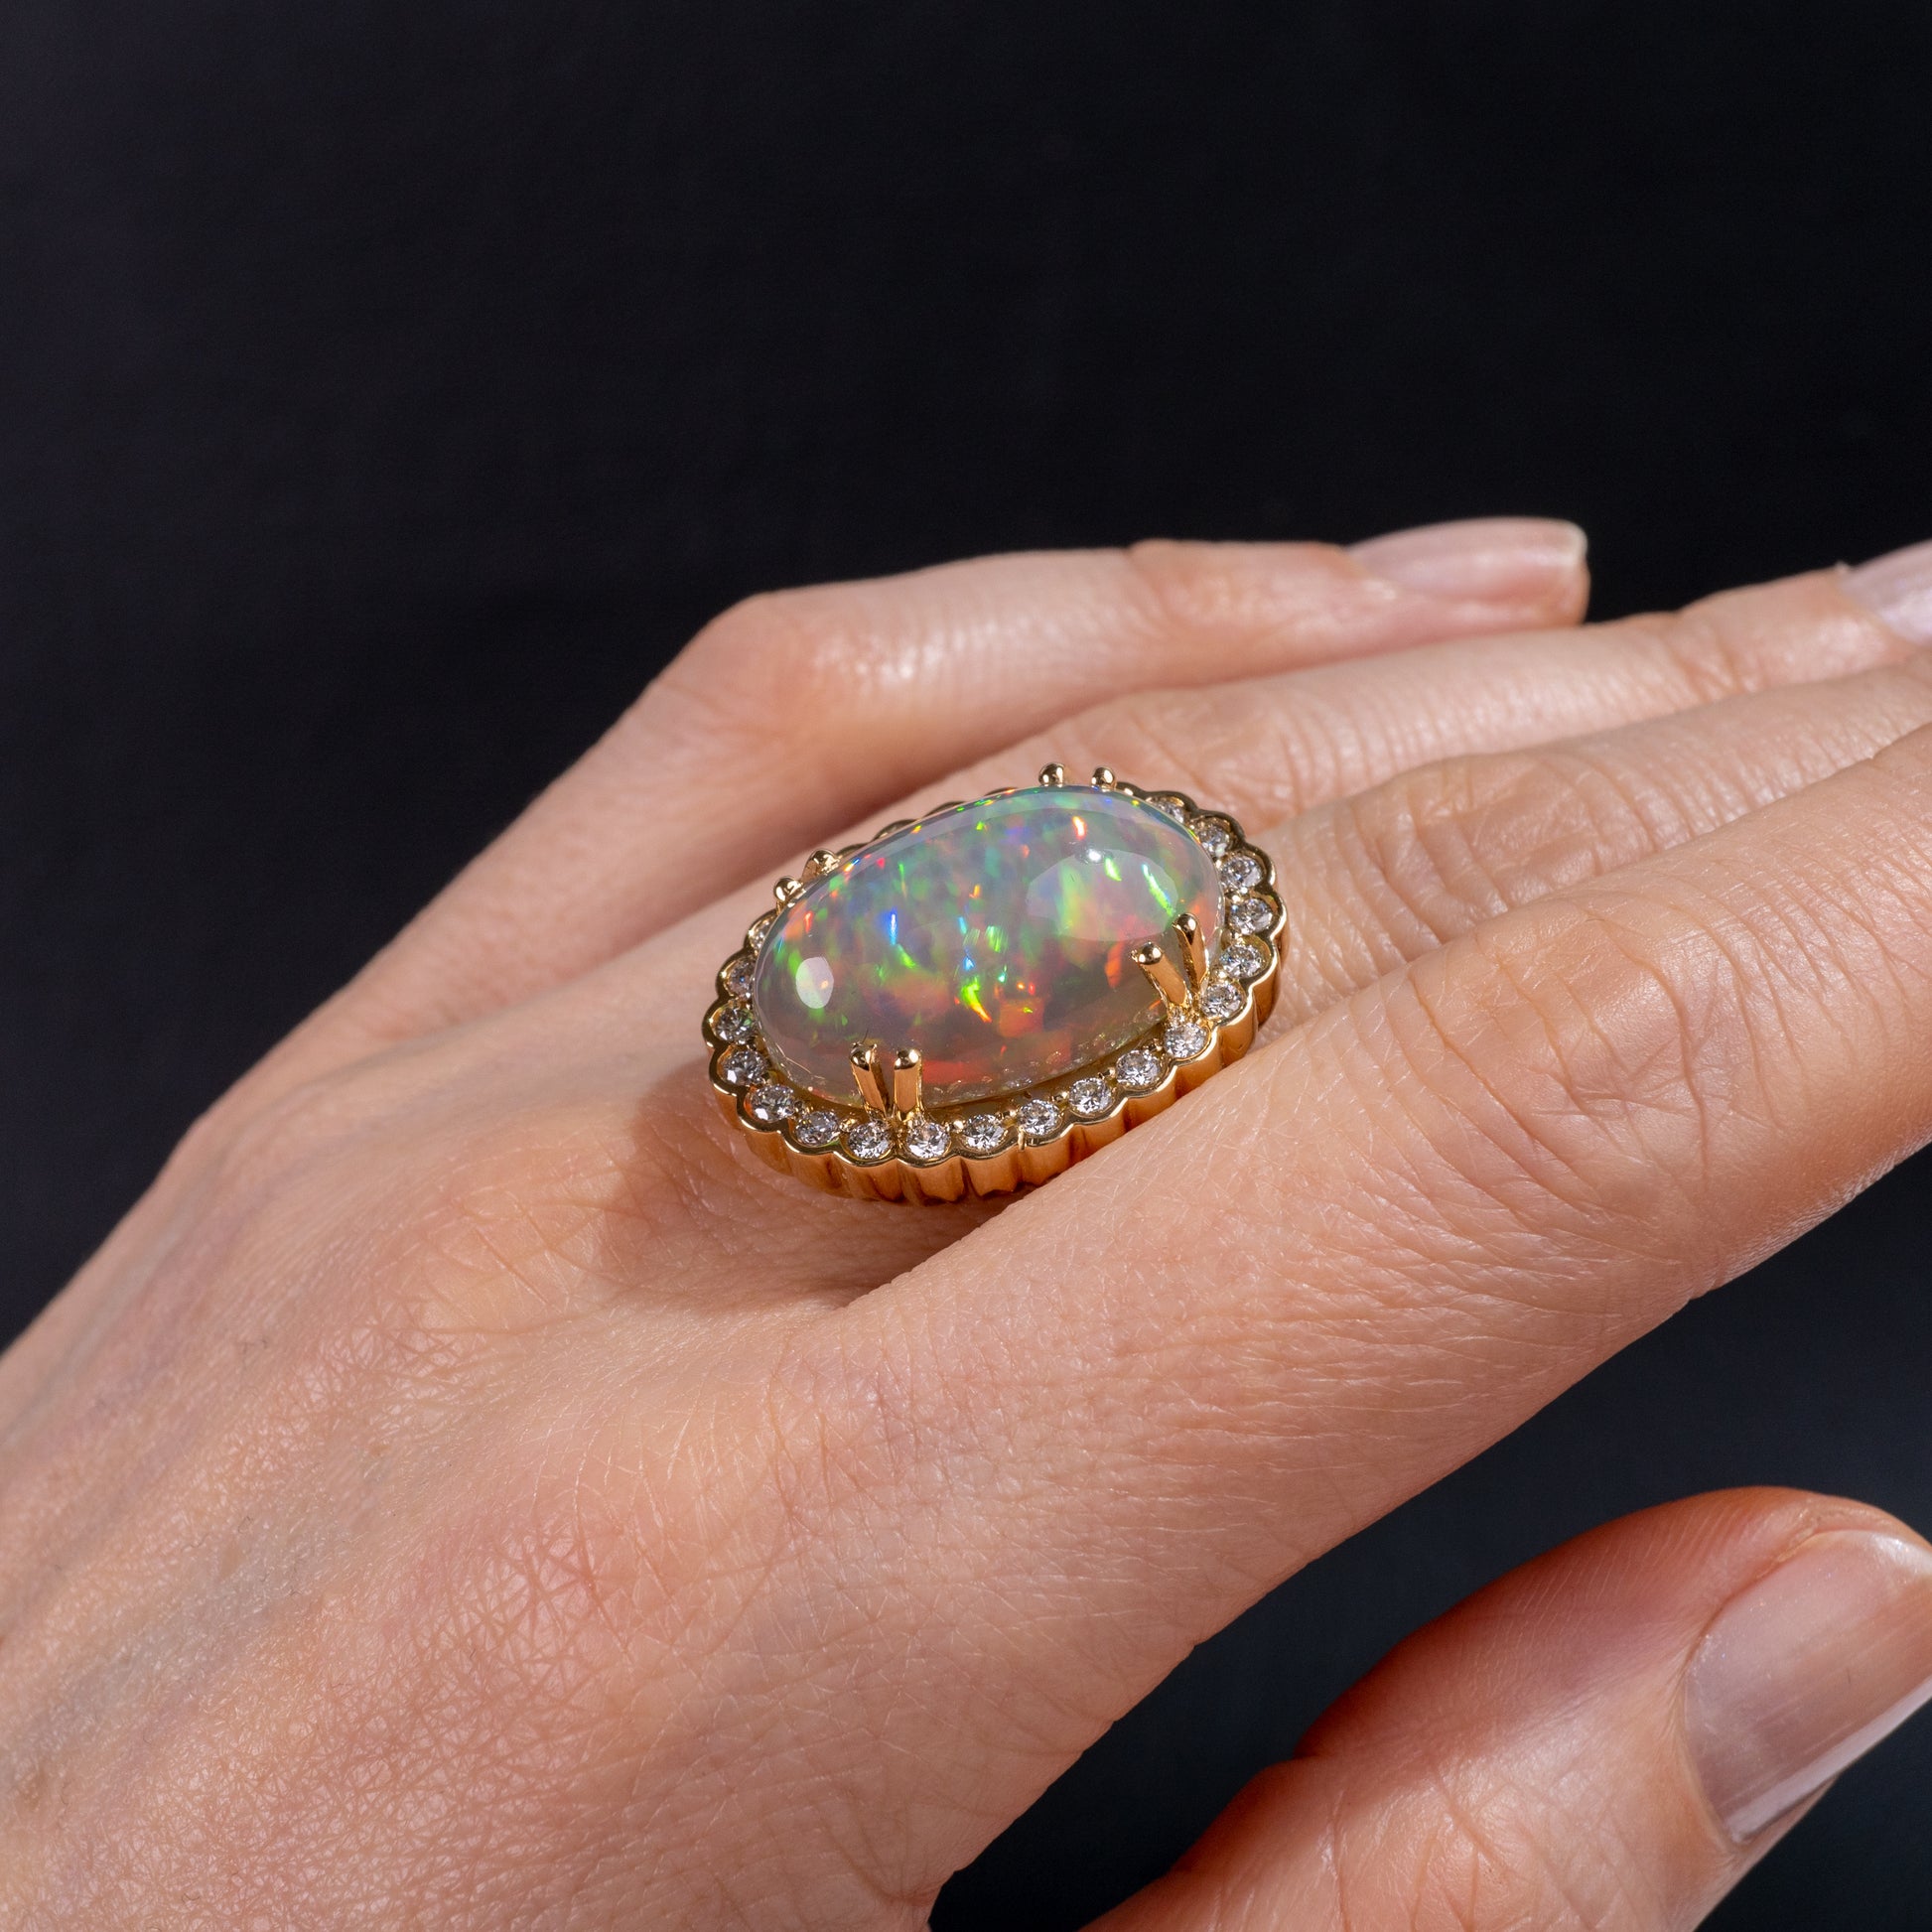 large opal ring gold with diamond accents on hand